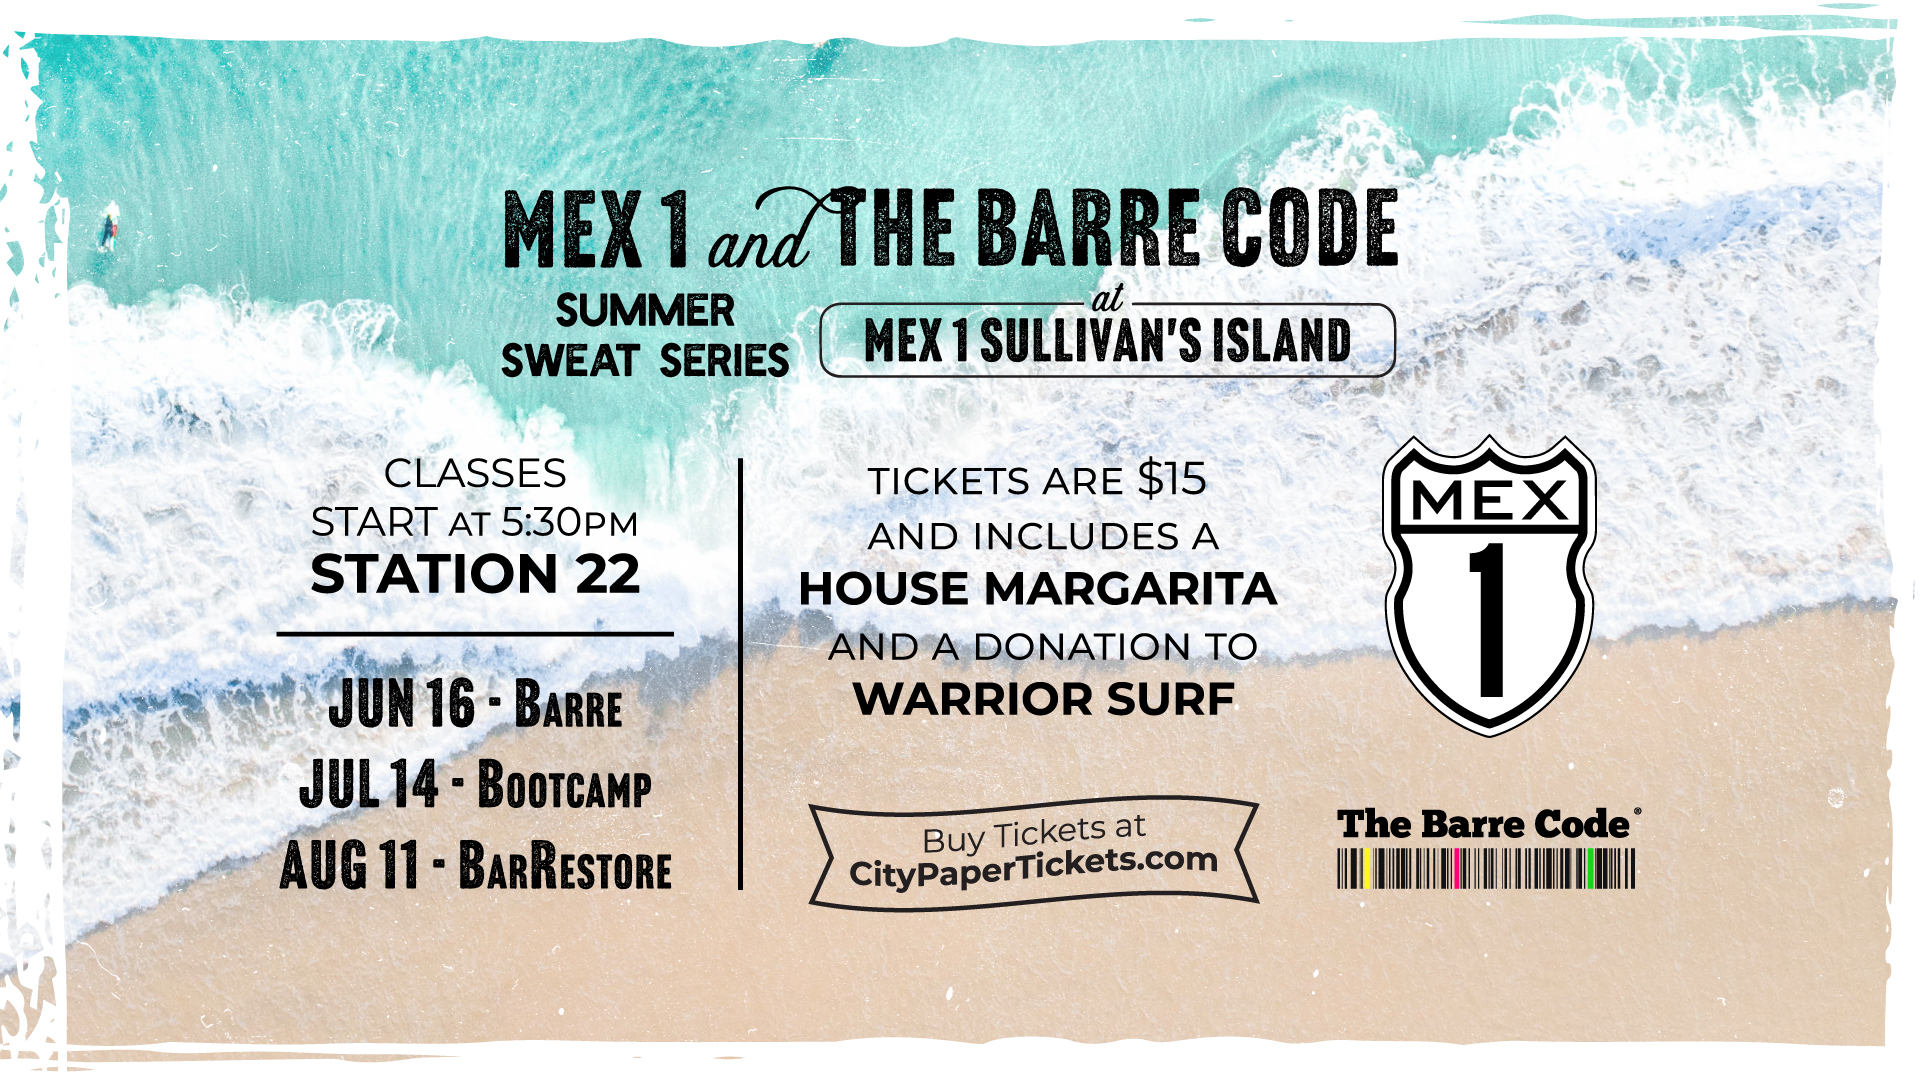 Summer Sweat Series with Mex 1 and The Barre Code